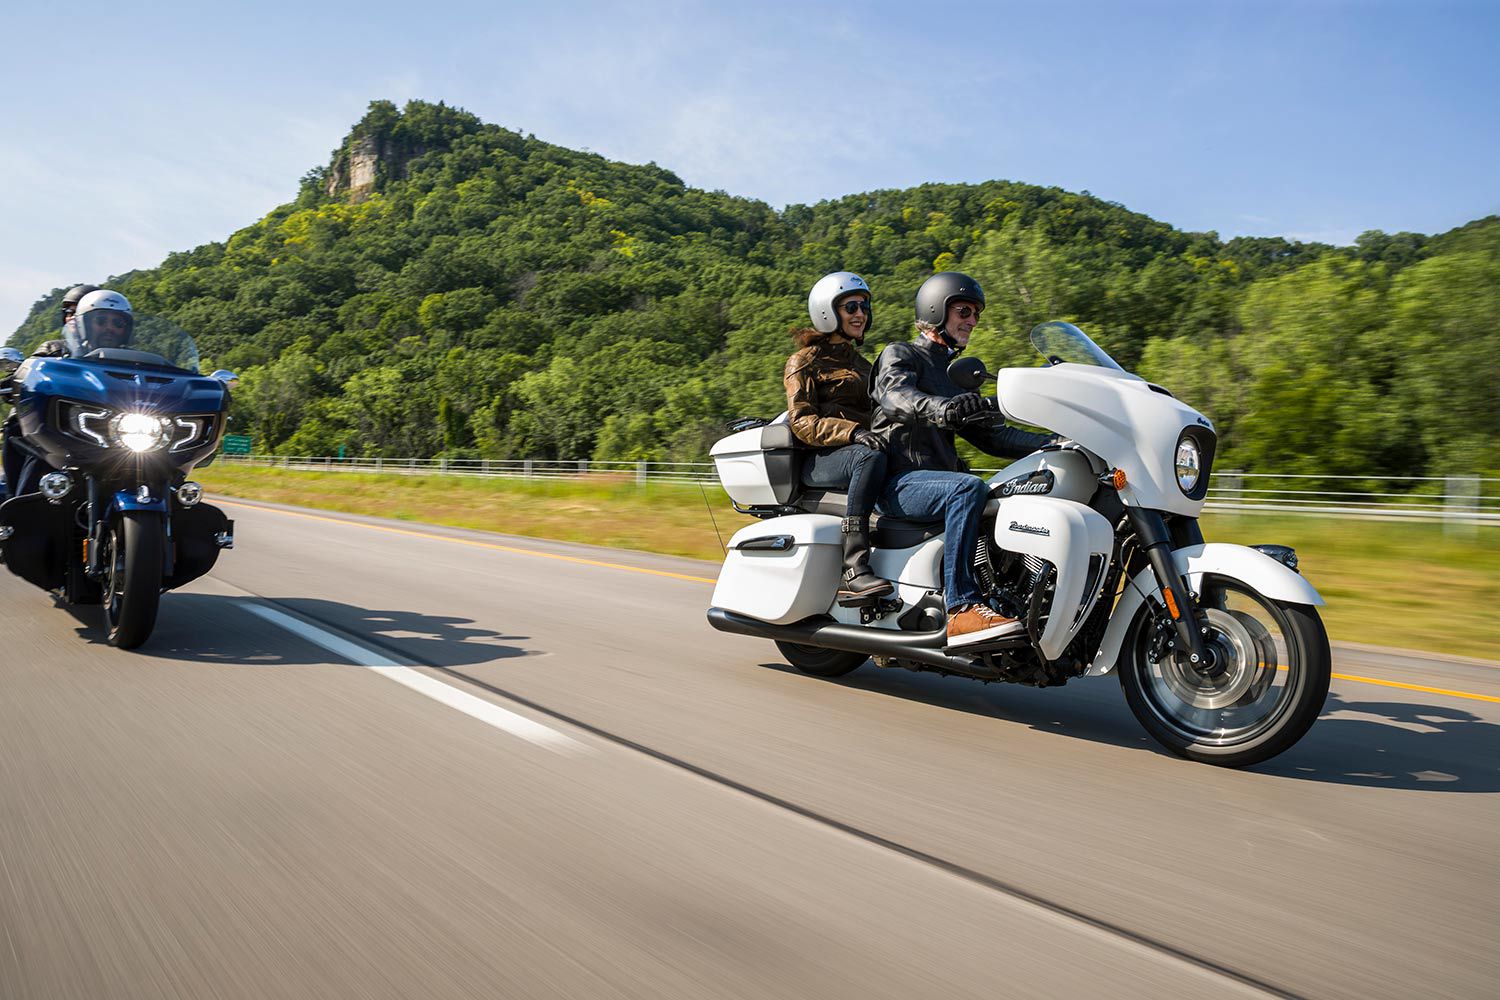 The Indian Motorcycle Roadmaster Dark Horse makes two-up riding a joy.